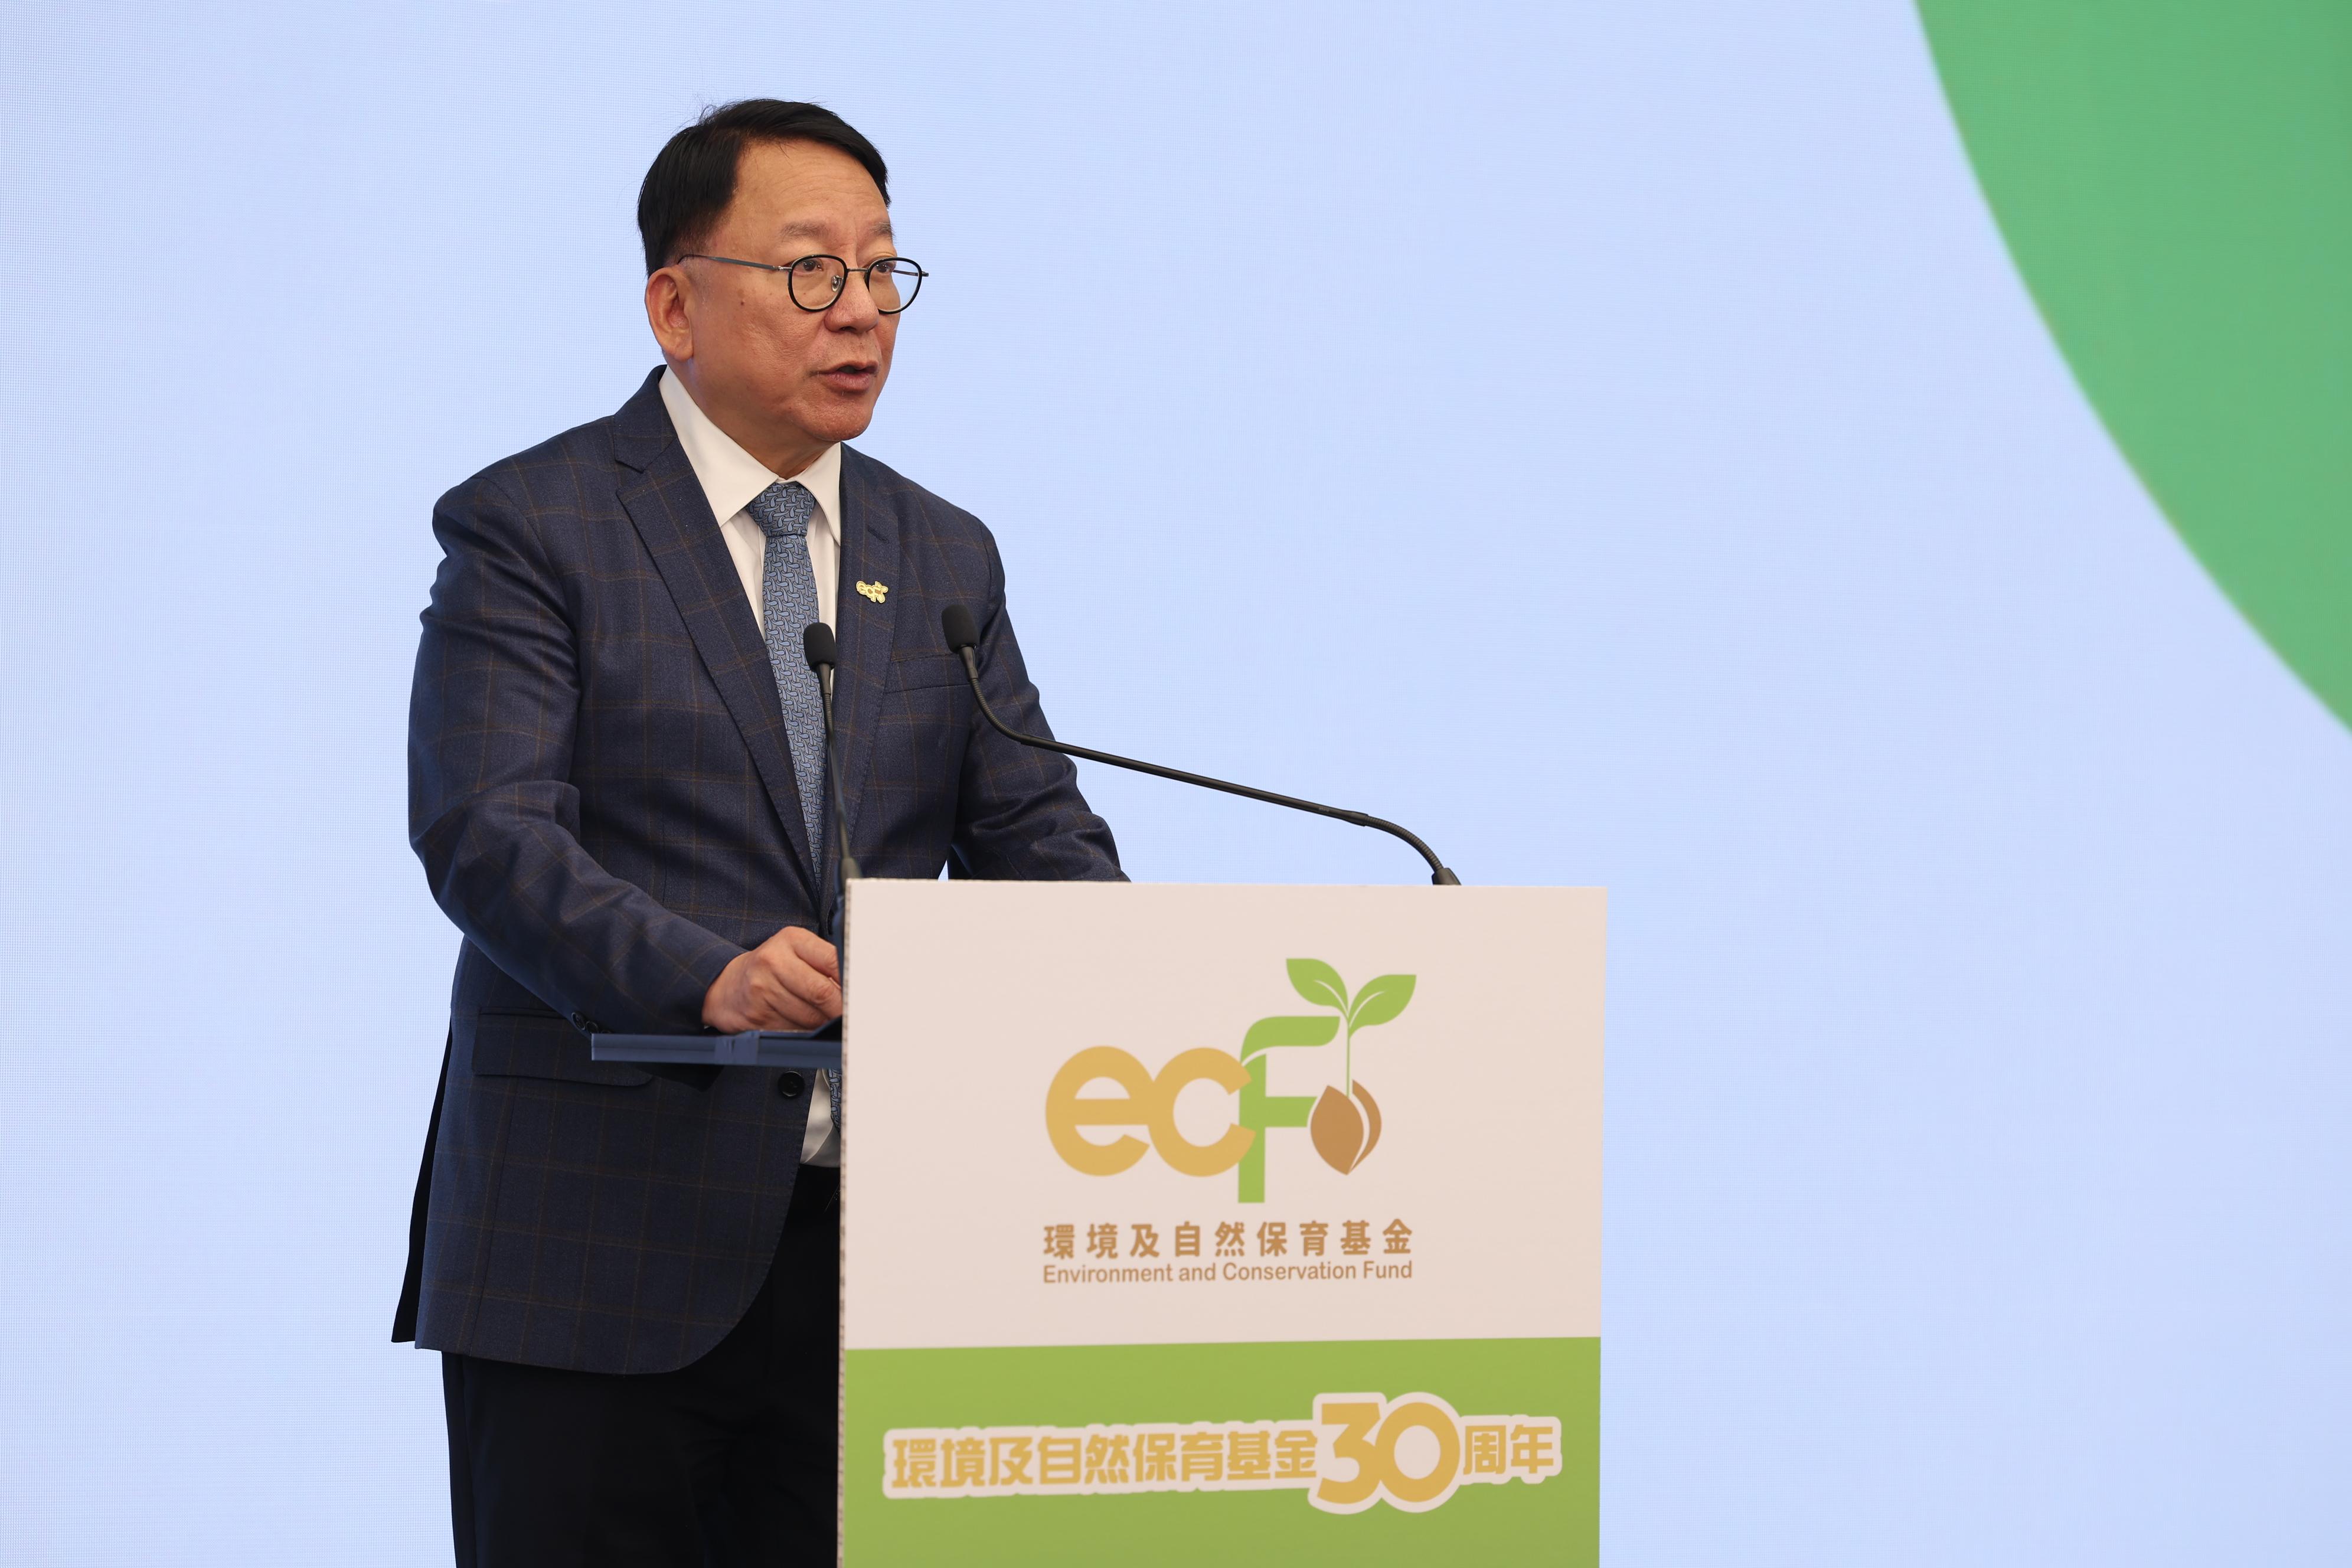 The Environment and Conservation Fund 30th anniversary "Let's Grow for Green" launching ceremony was held at the Hong Kong Productivity Council Building in Kowloon today (June 3). Photo shows the Chief Secretary for Administration, Mr Chan Kwok-ki, delivering his speech at the launching ceremony.